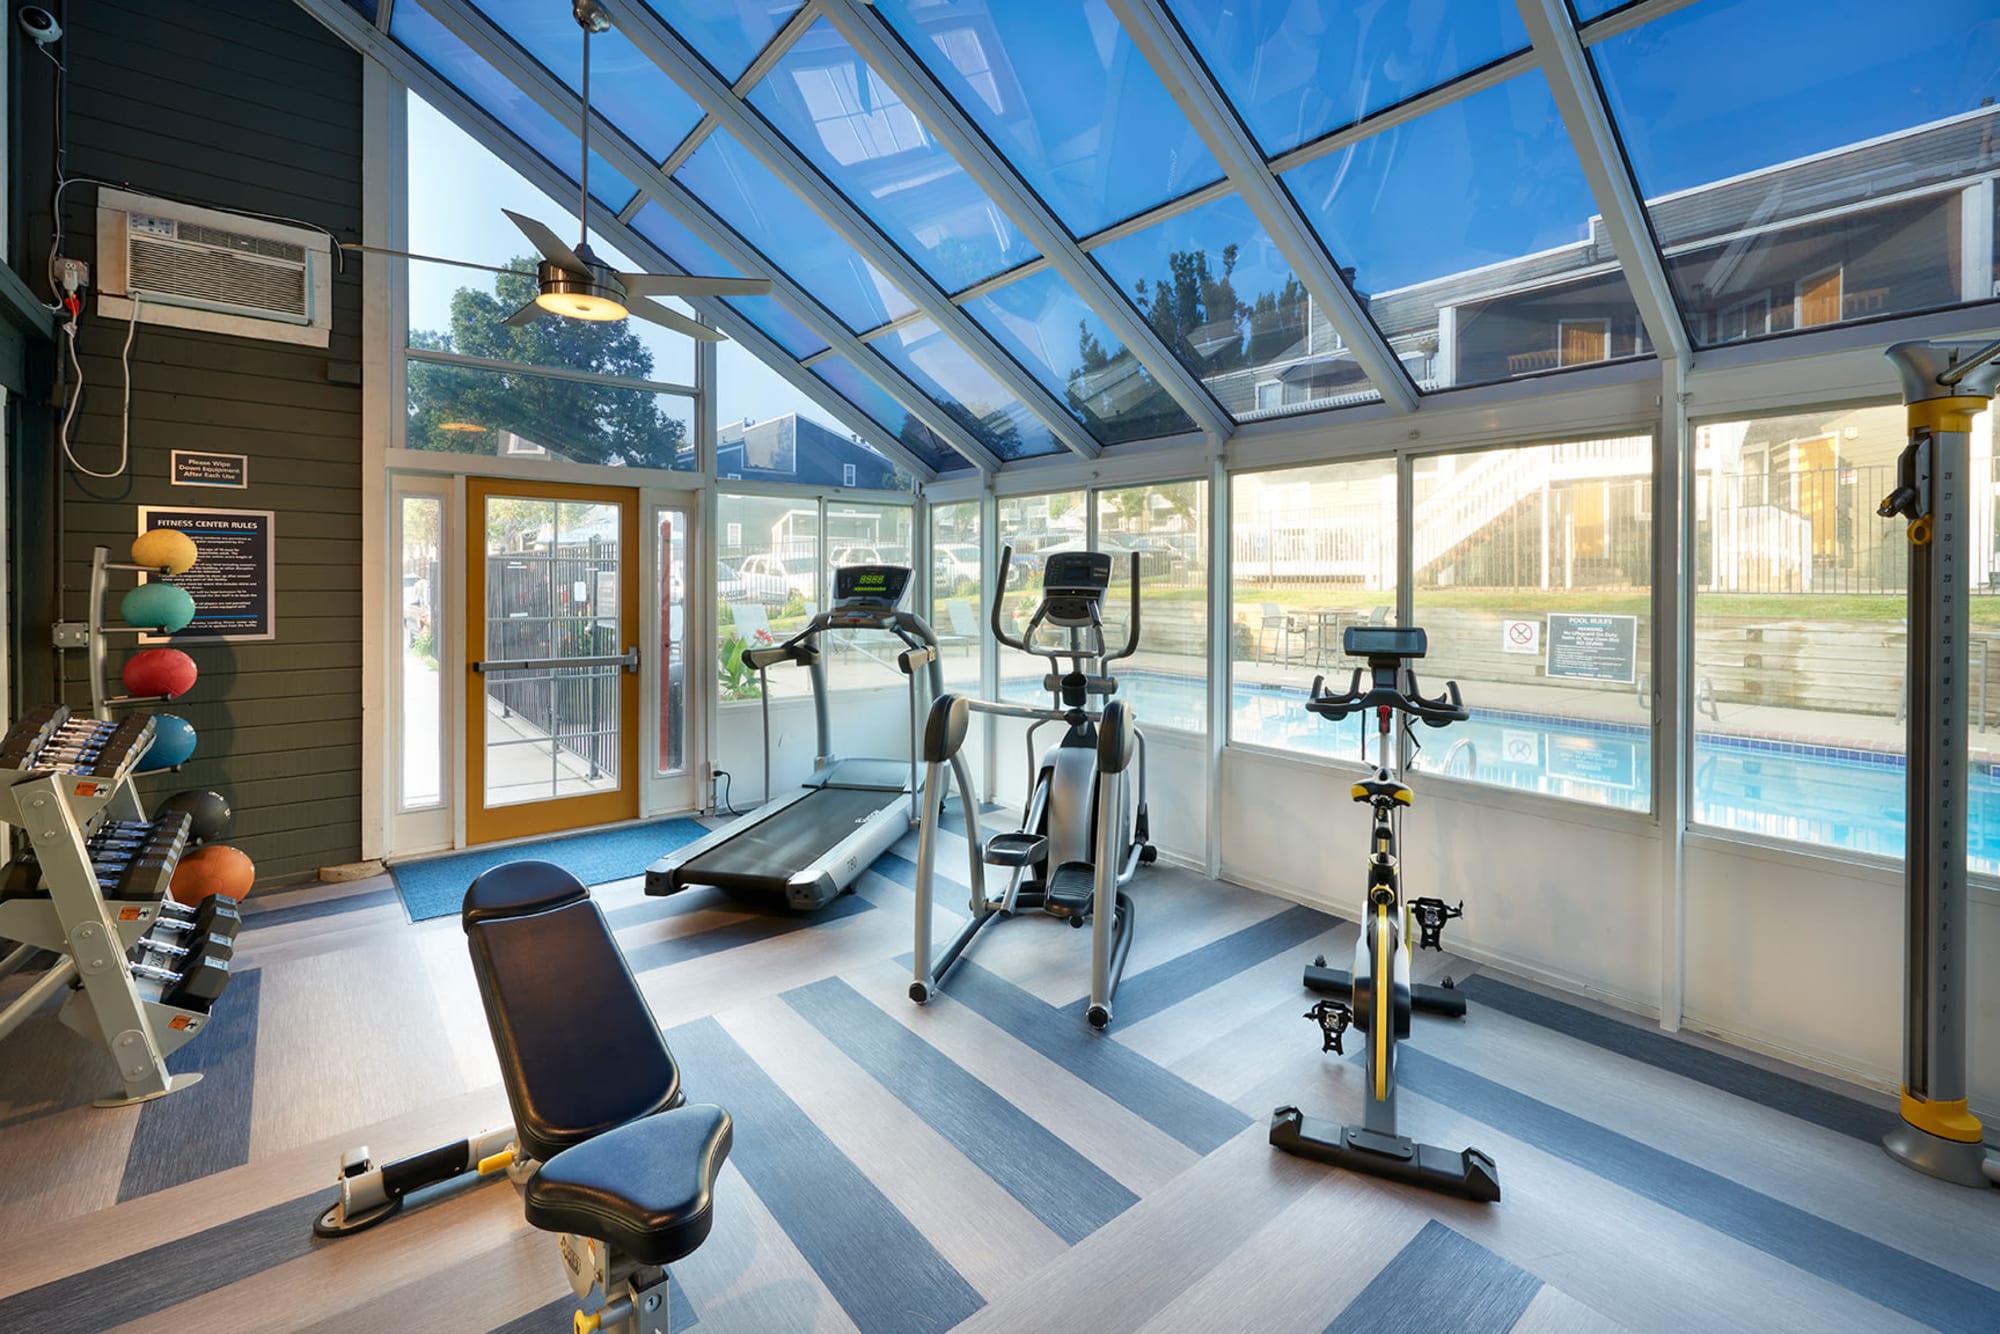 The gym facilities at Bluesky Landing Apartments in Lakewood, Colorado